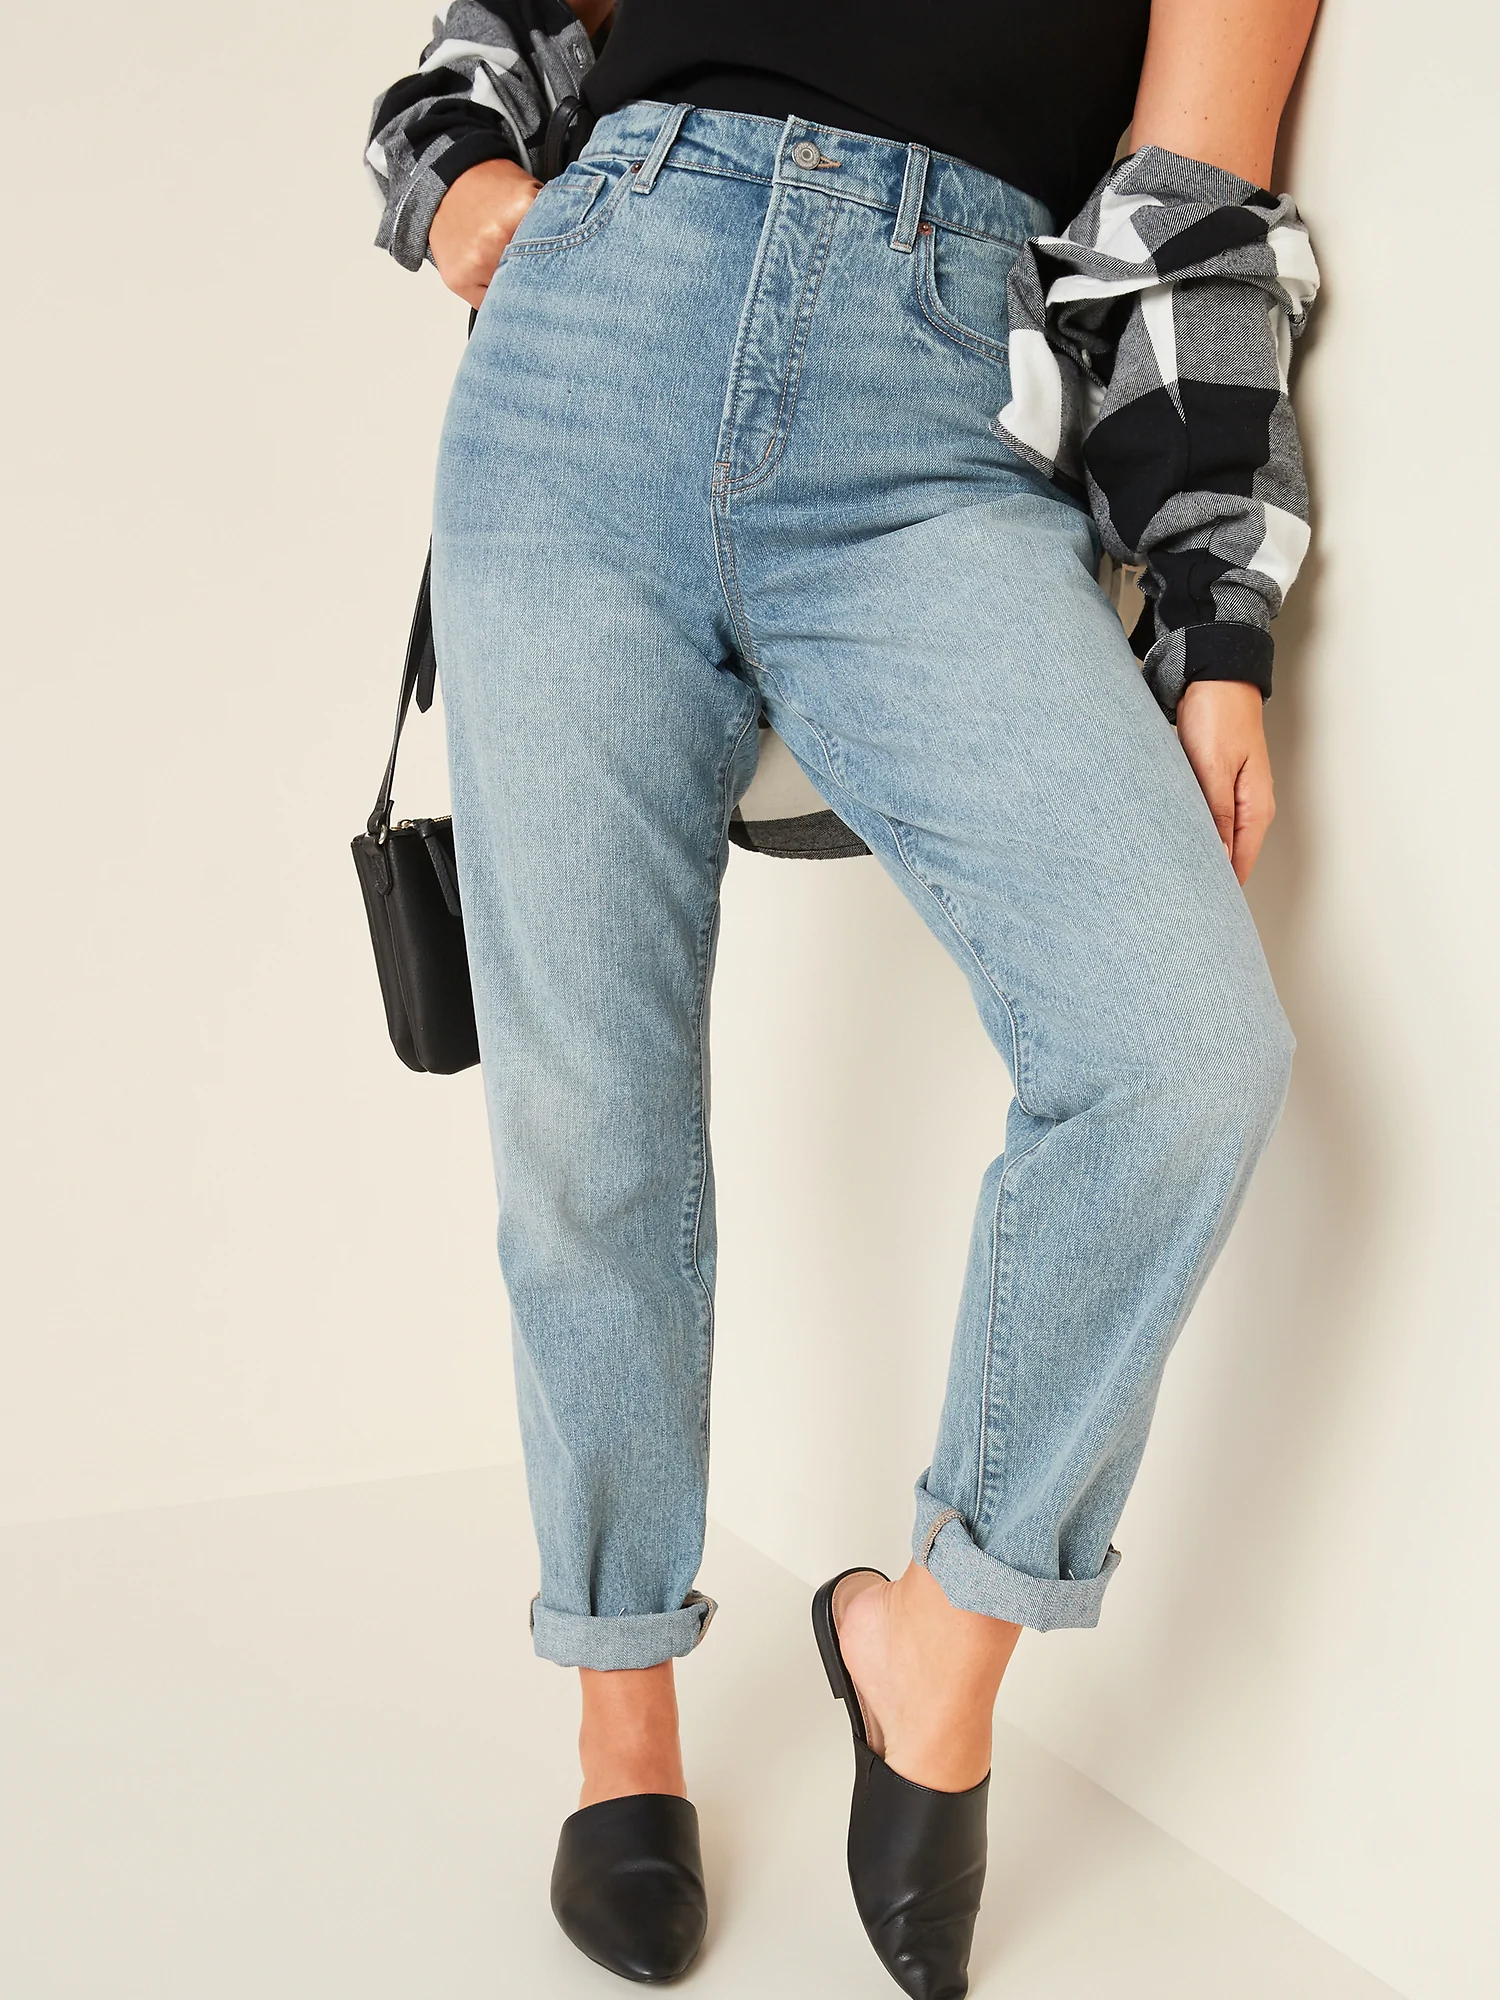 Buy > old navy sky high straight jeans > in stock